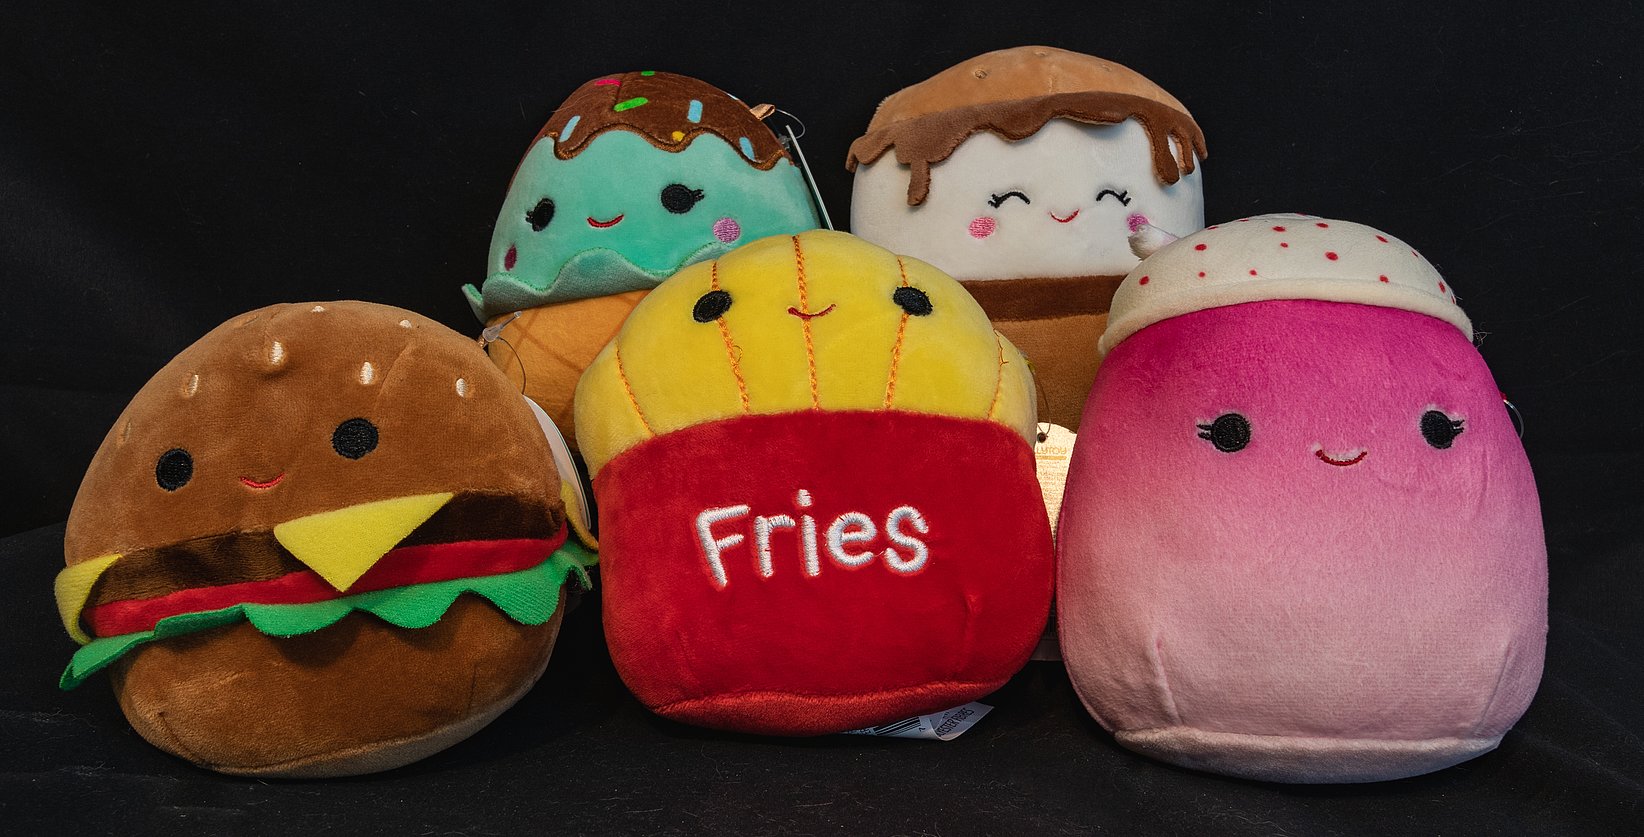 Five different cuddly toys in the shape of food such as burgers, fries and ice cream